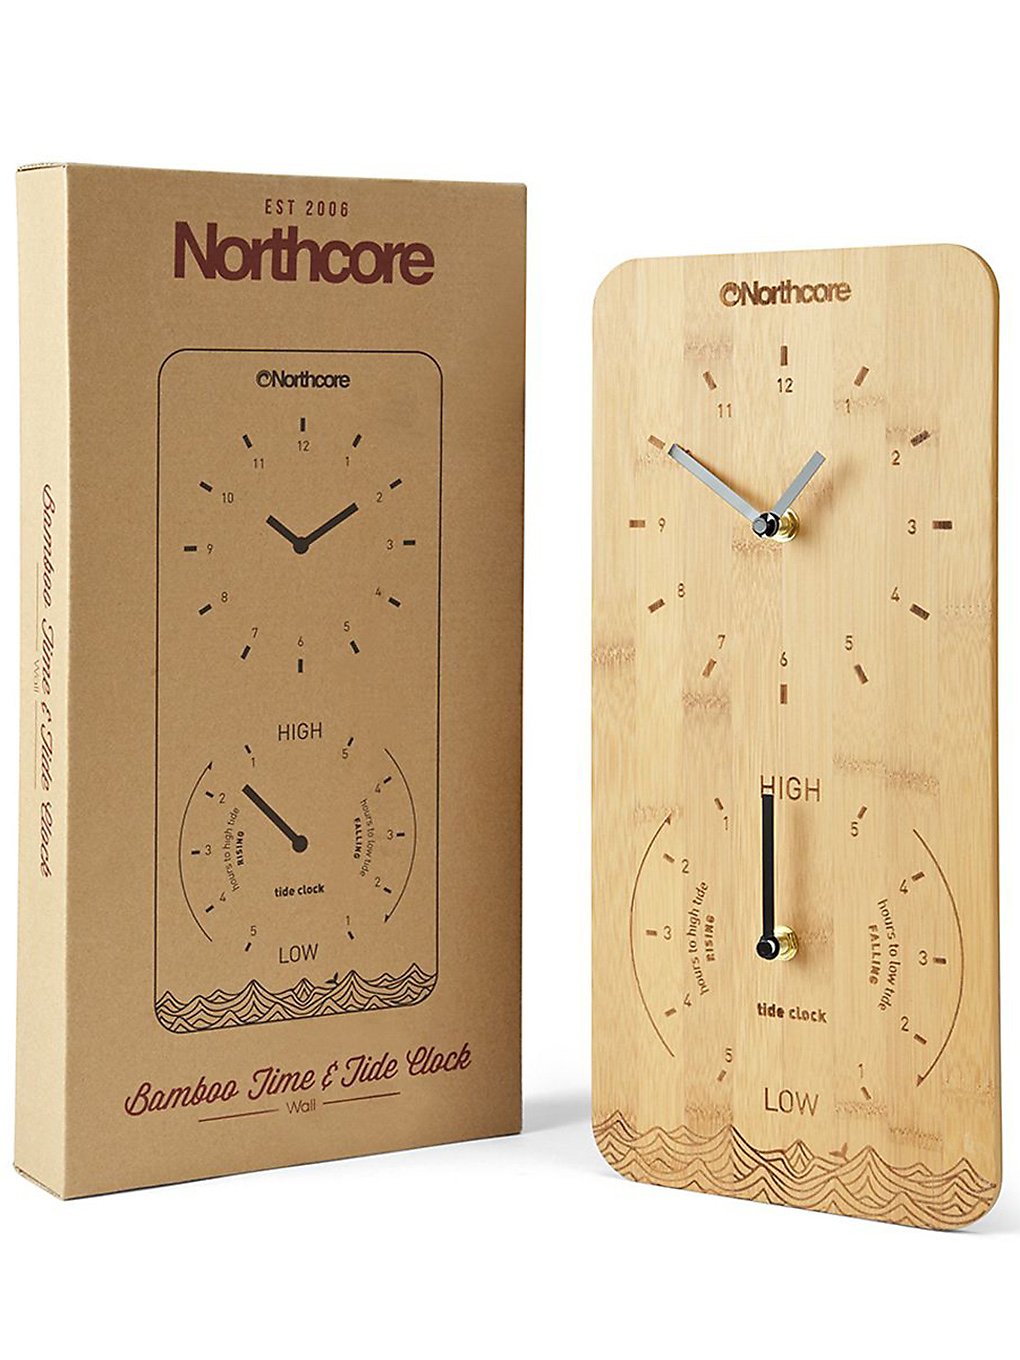 Northcore Bamboo Time And Tide Wall Clock marron